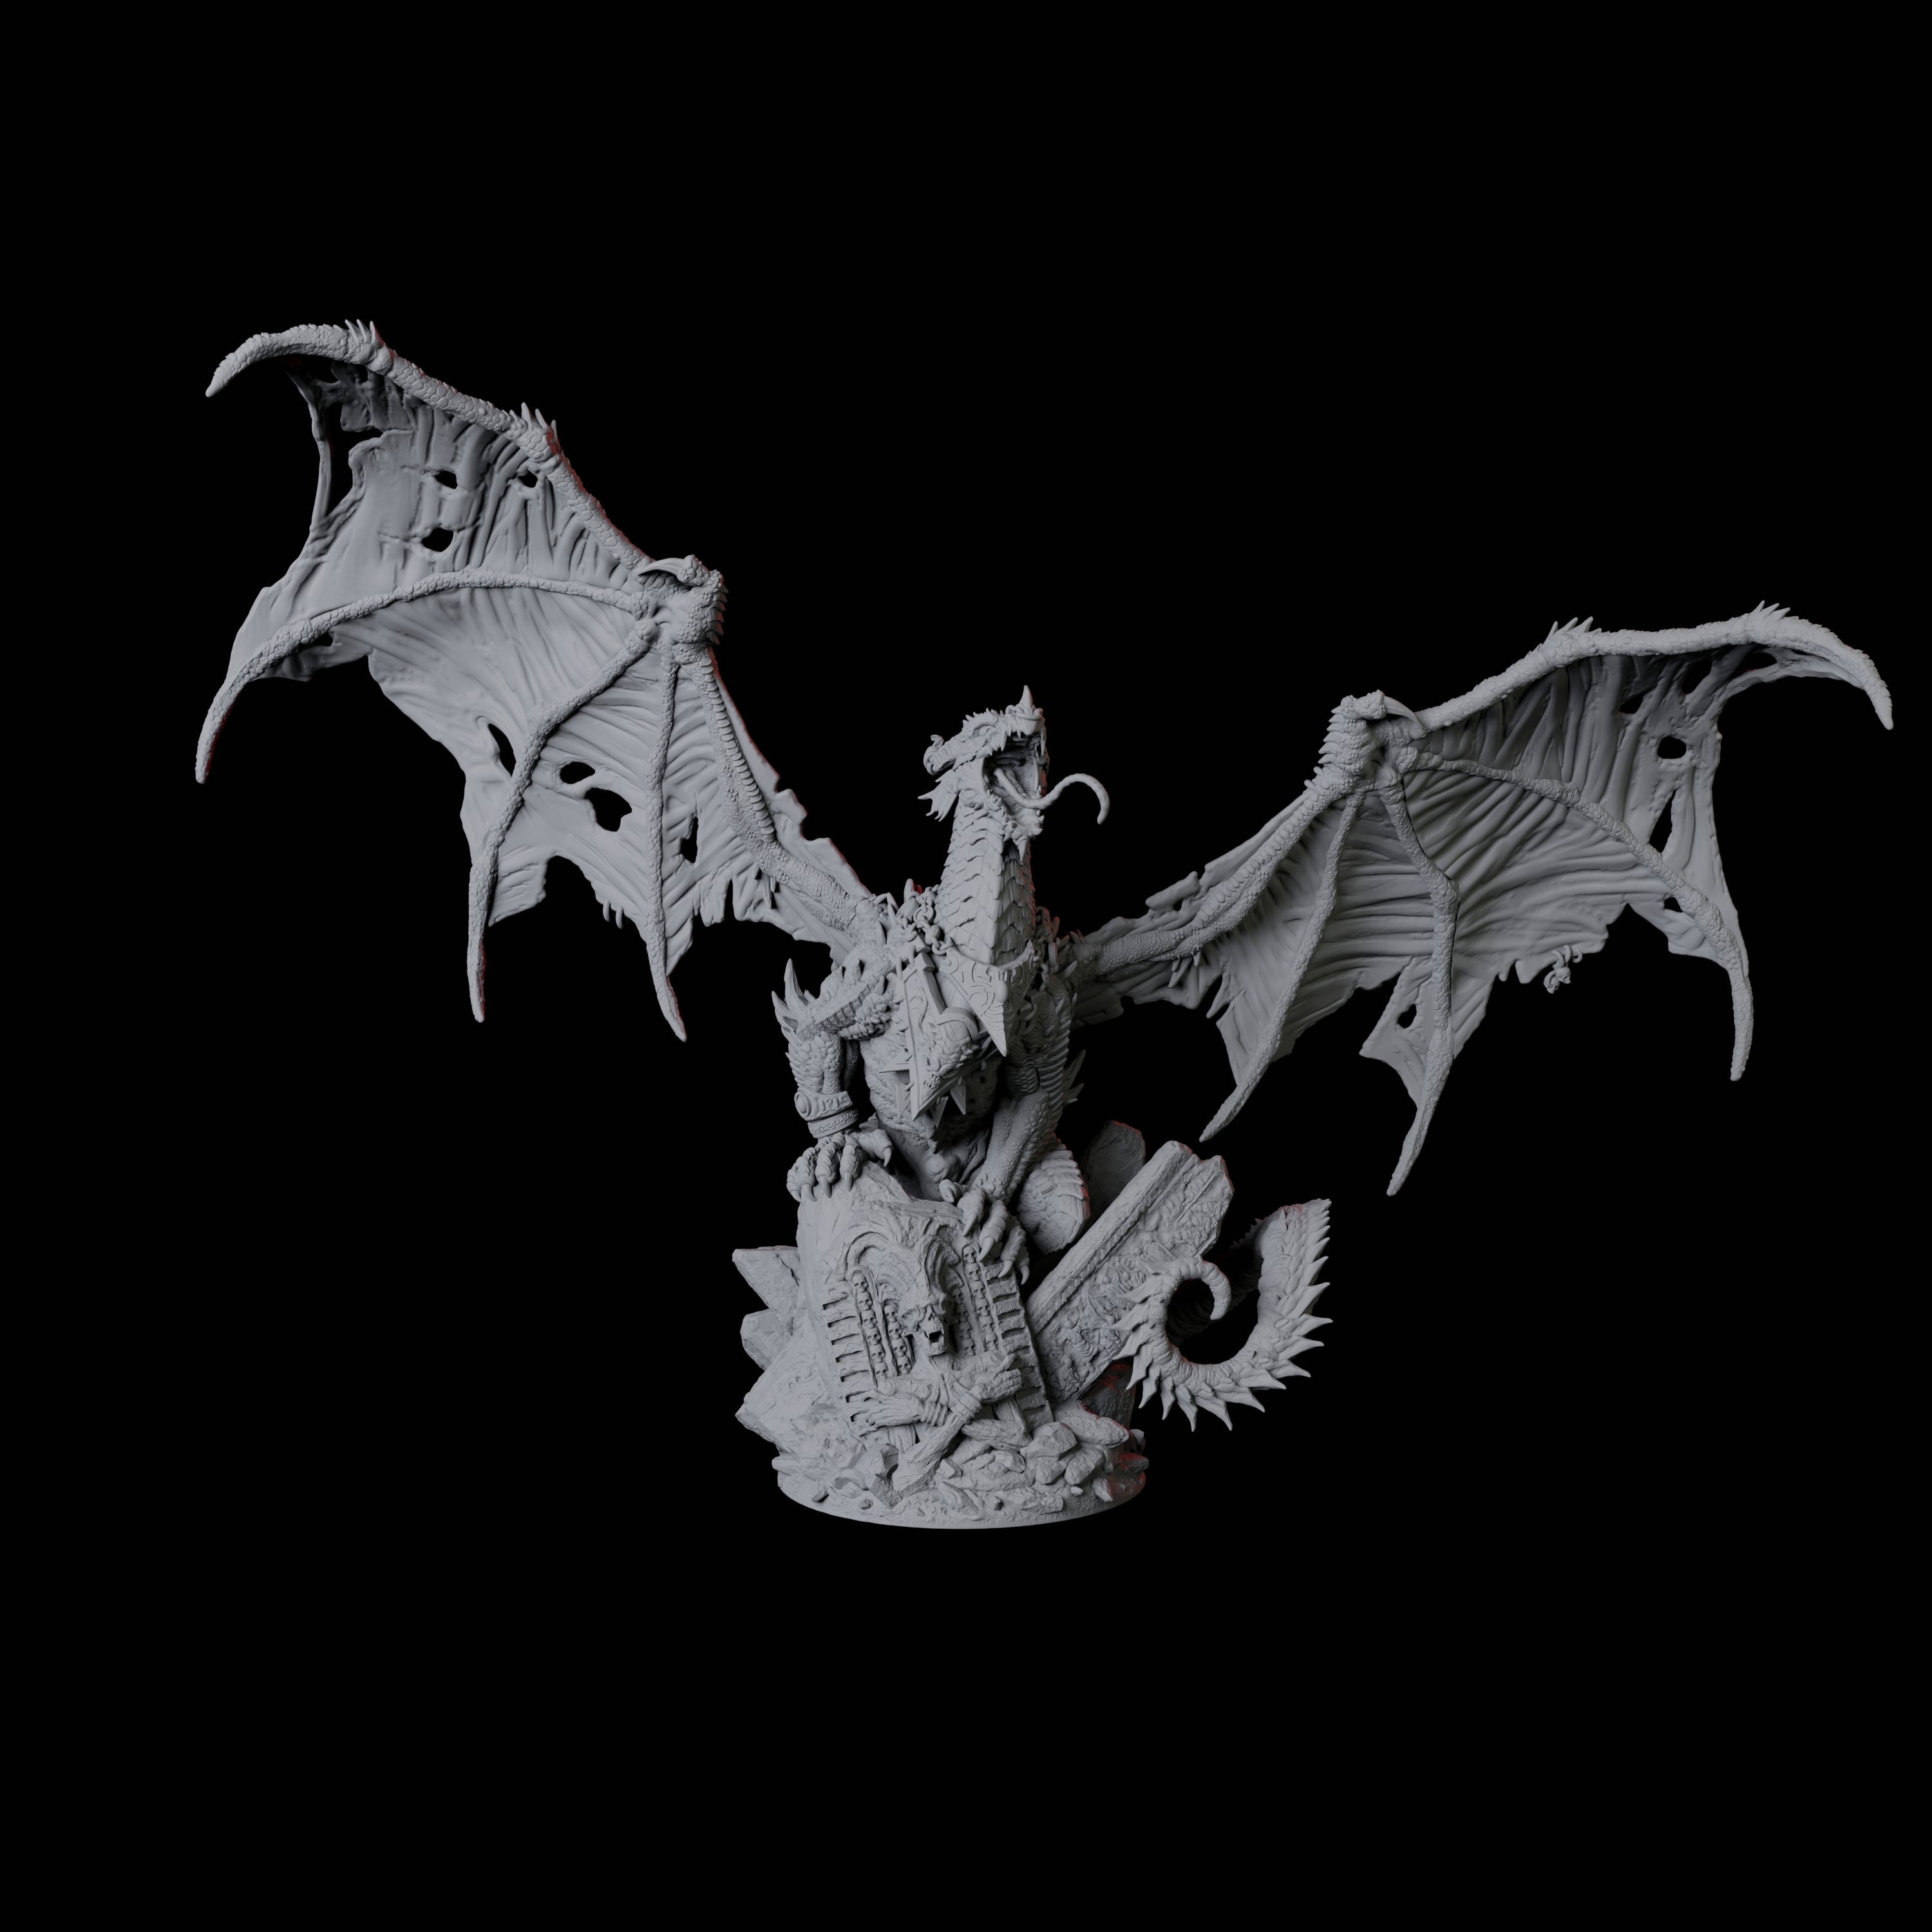 Raging Black Dragon Miniature for Dungeons and Dragons, Pathfinder or other TTRPGs